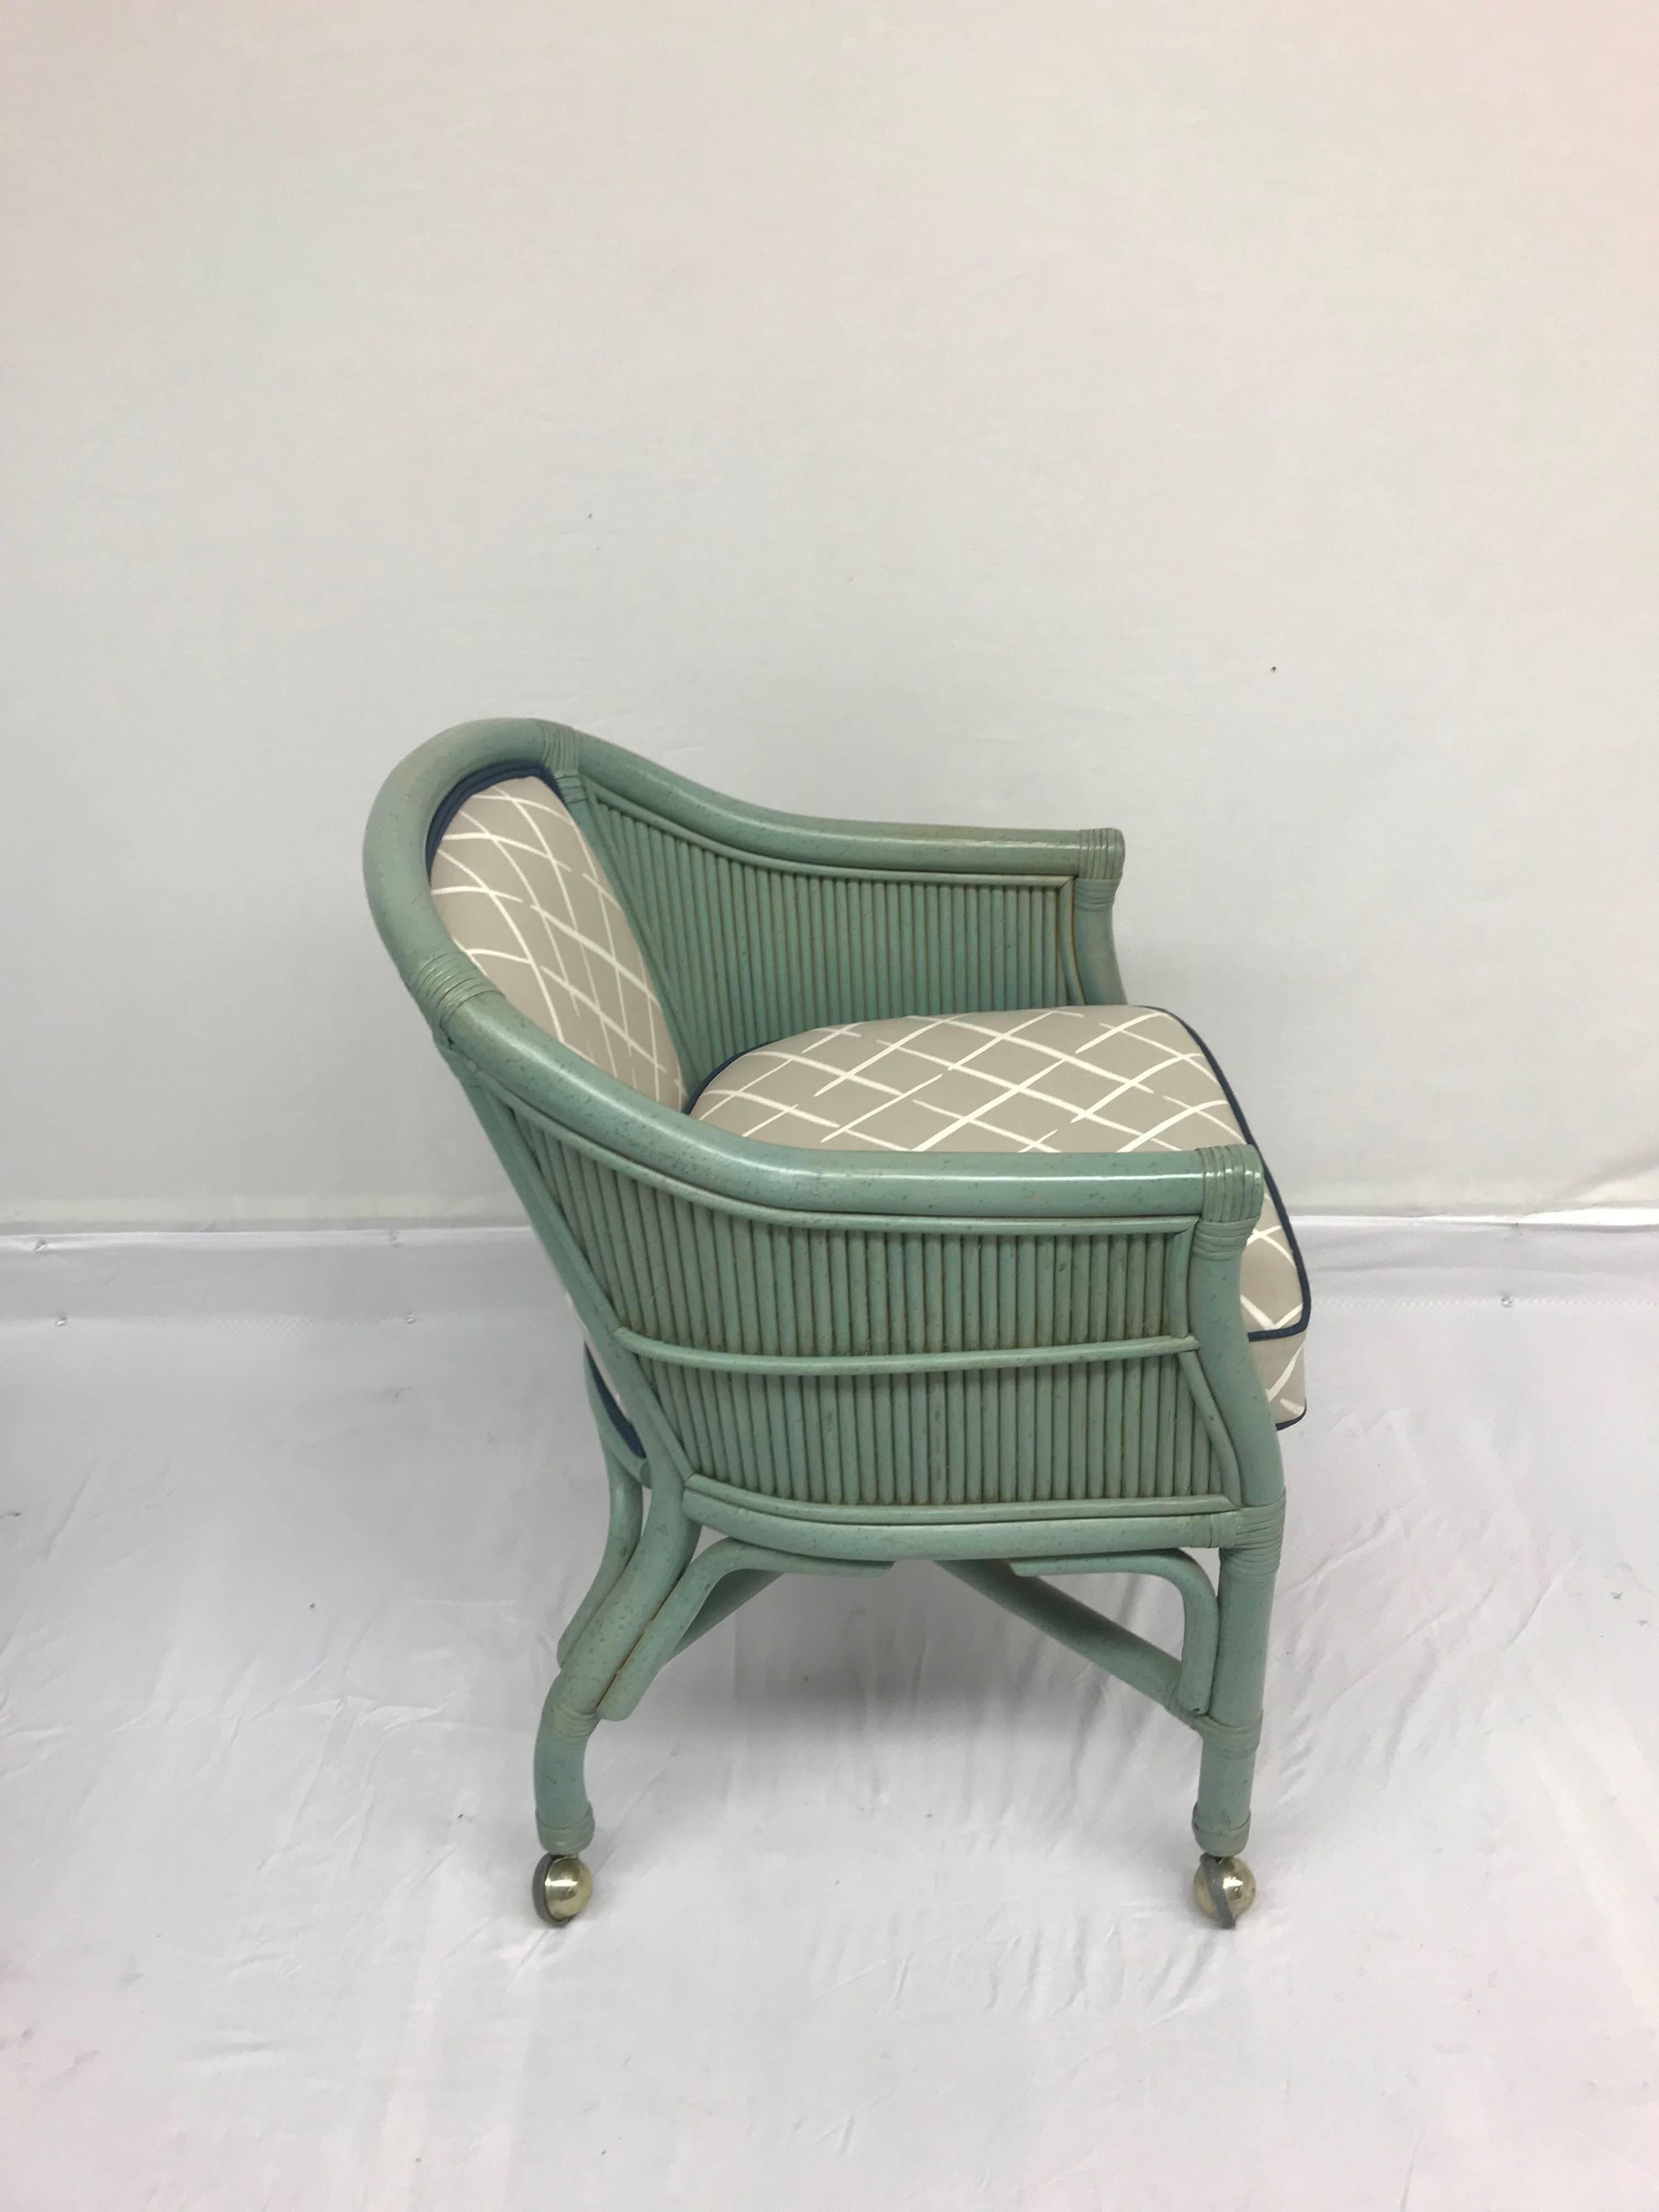 20th Century Vintage Seafoam Blue Rattan Chairs With Casters - Set of 4 For Sale